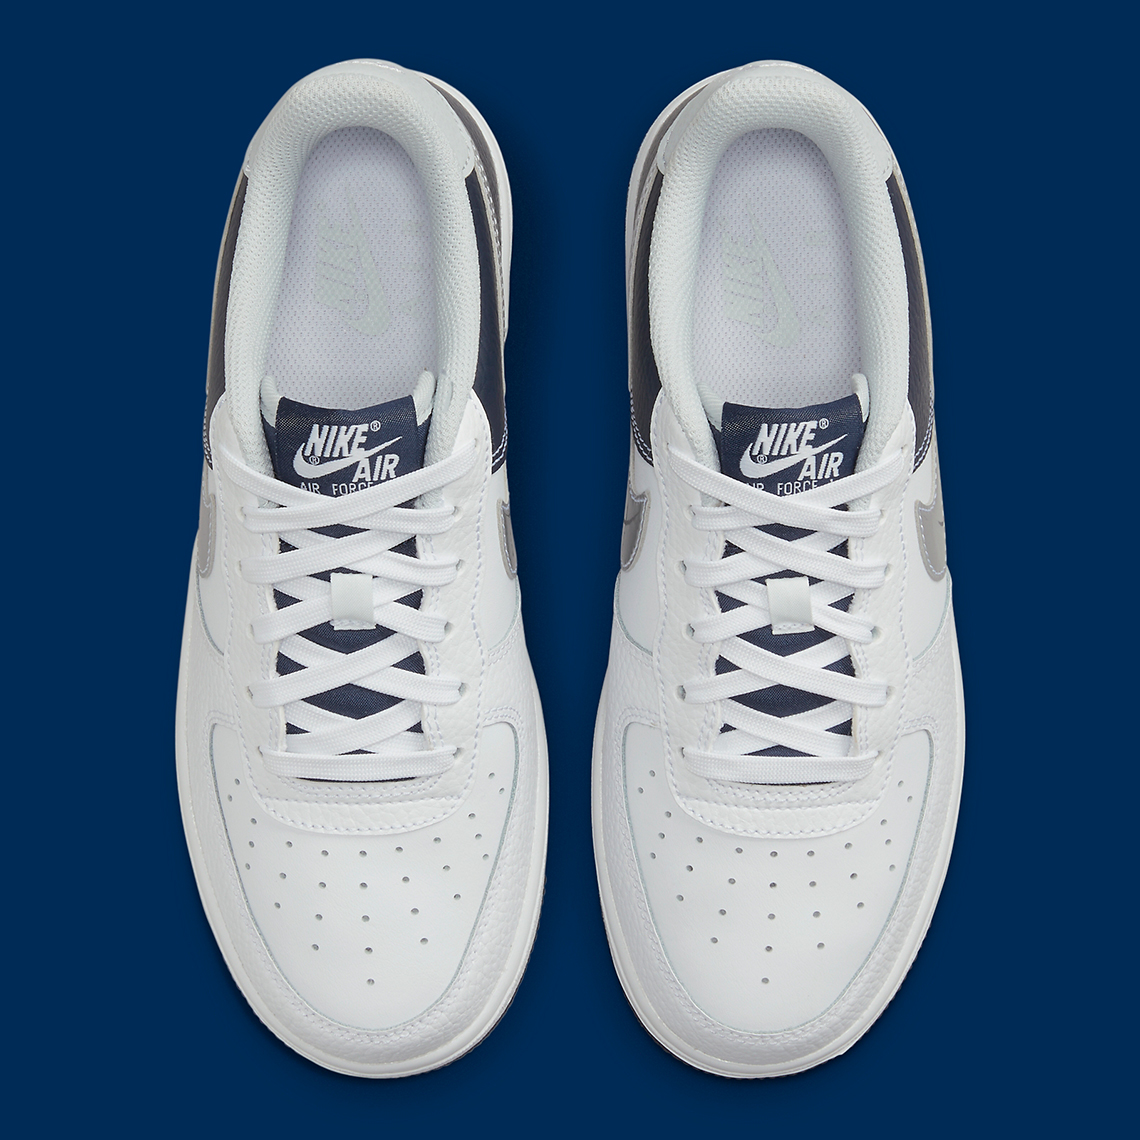 nike court royale sneakers whire and gold wedding Gs White Silver Navy Dq6048 100 2